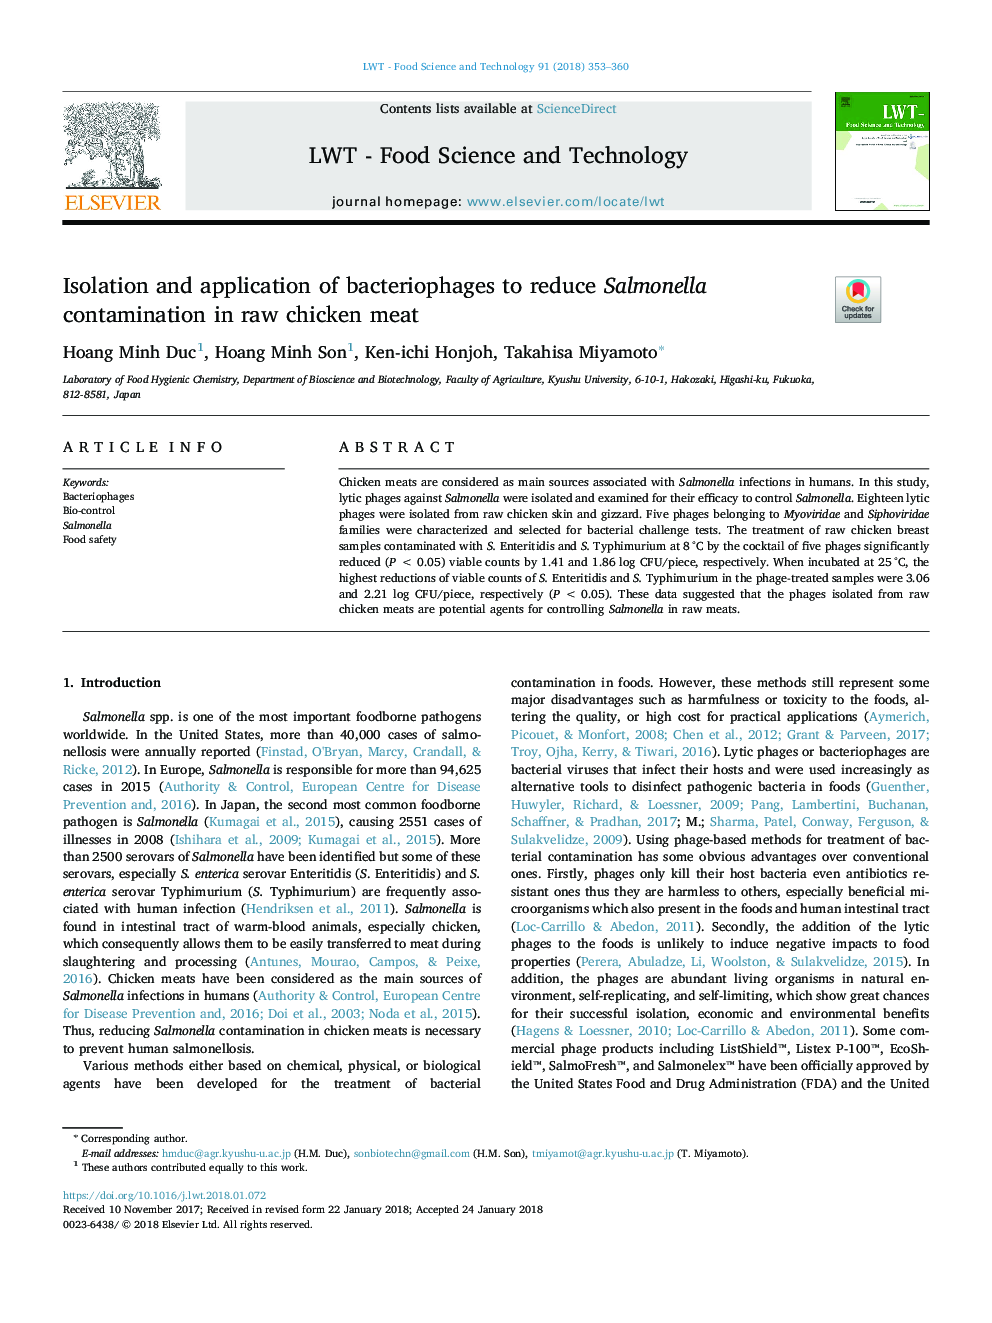 Isolation and application of bacteriophages to reduce Salmonella contamination in raw chicken meat